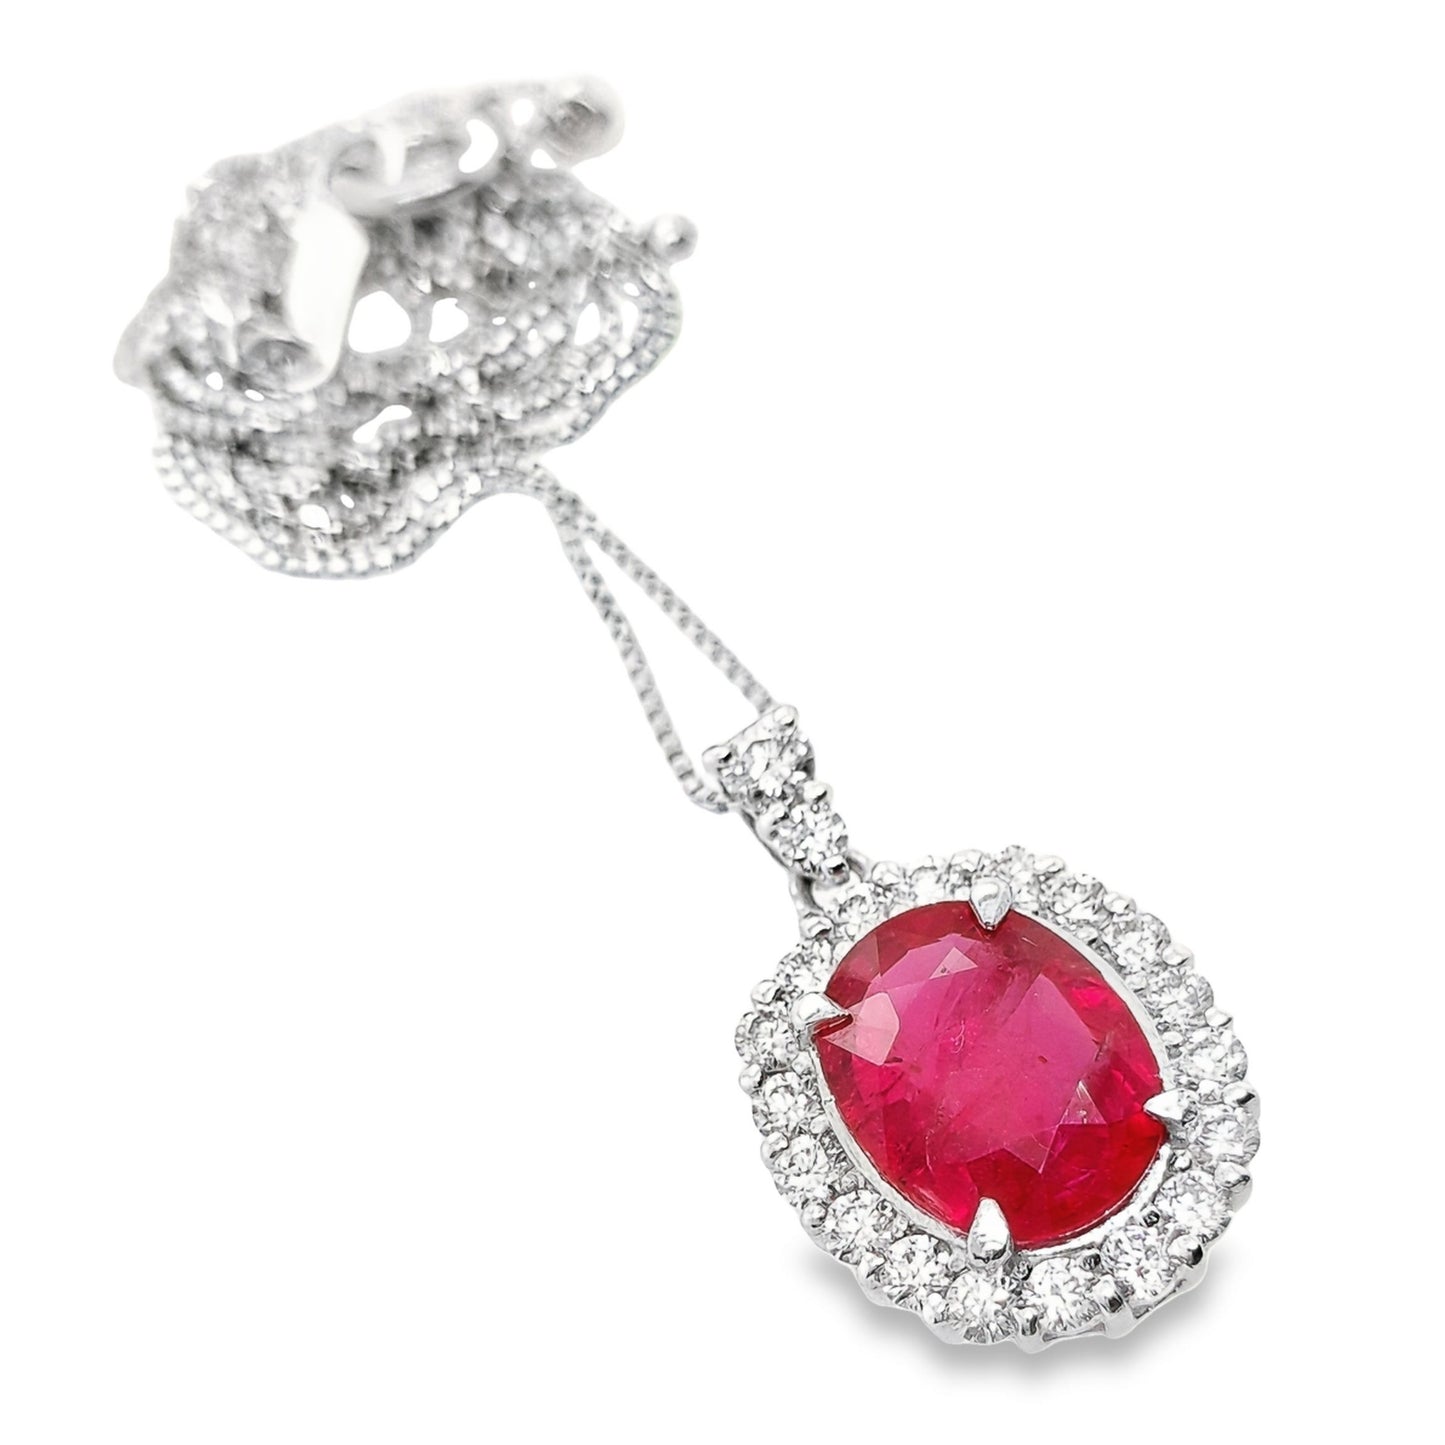 1.98ct NATURAL MADAGASCAR RUBY and 0.46ct NATURAL DIAMONDS set in Platinum Necklace with Pendant